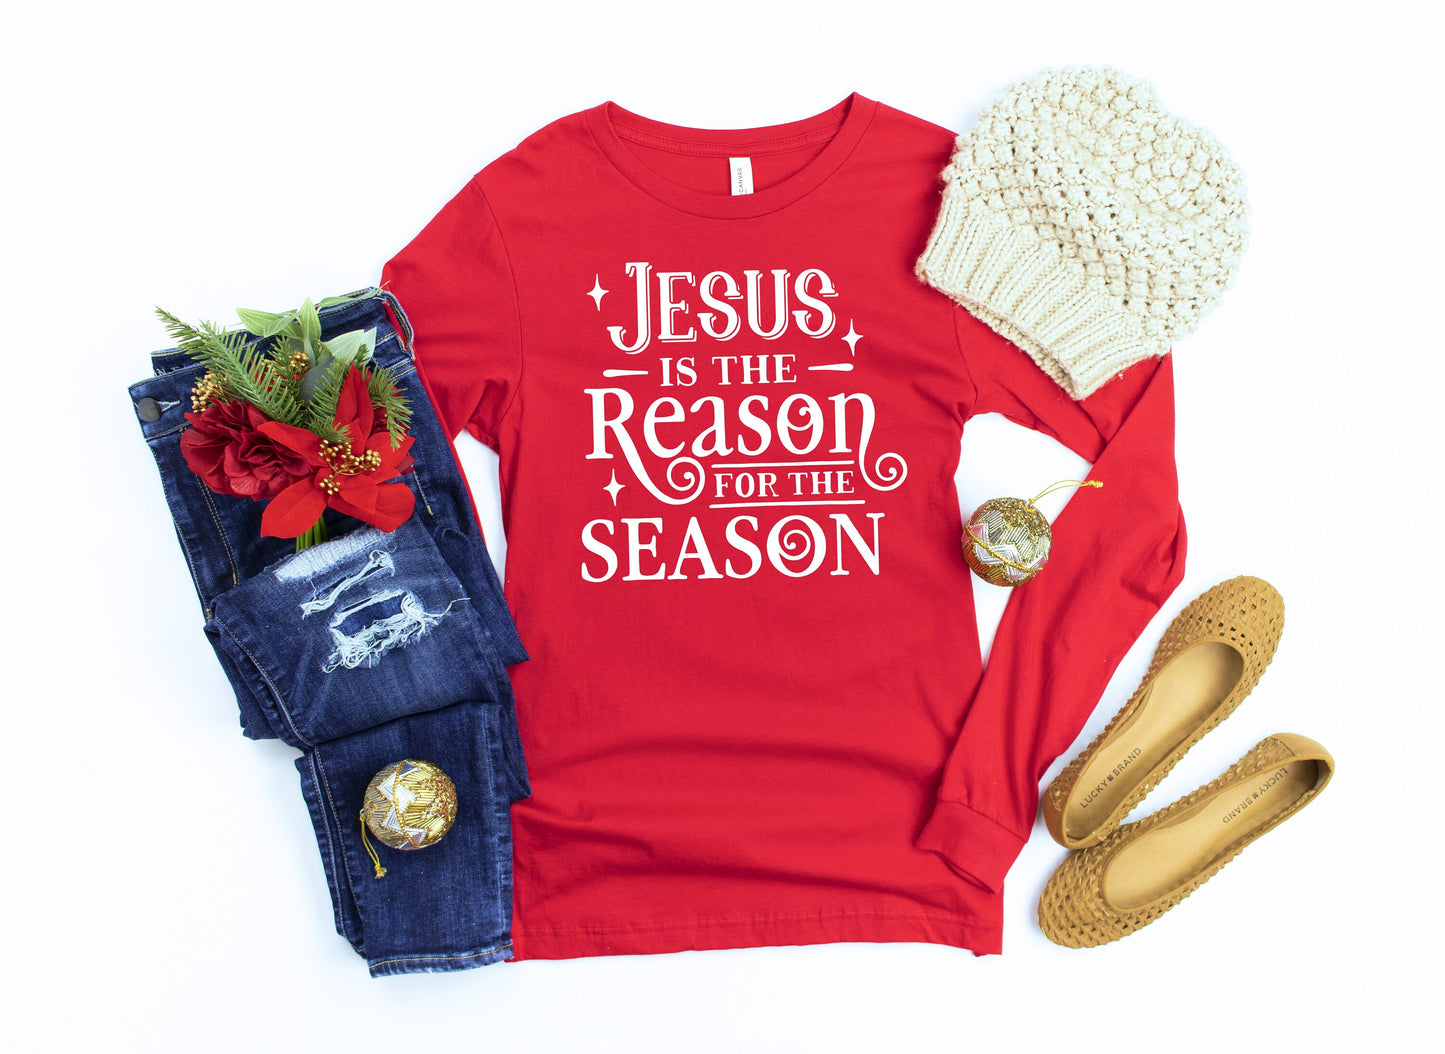 Jesus is the Reason for the Season Women's Crewneck Longsleeved T-Shirt -  Christmas Party Shirt - Religious Christmas Shirt - Jesus Shirt